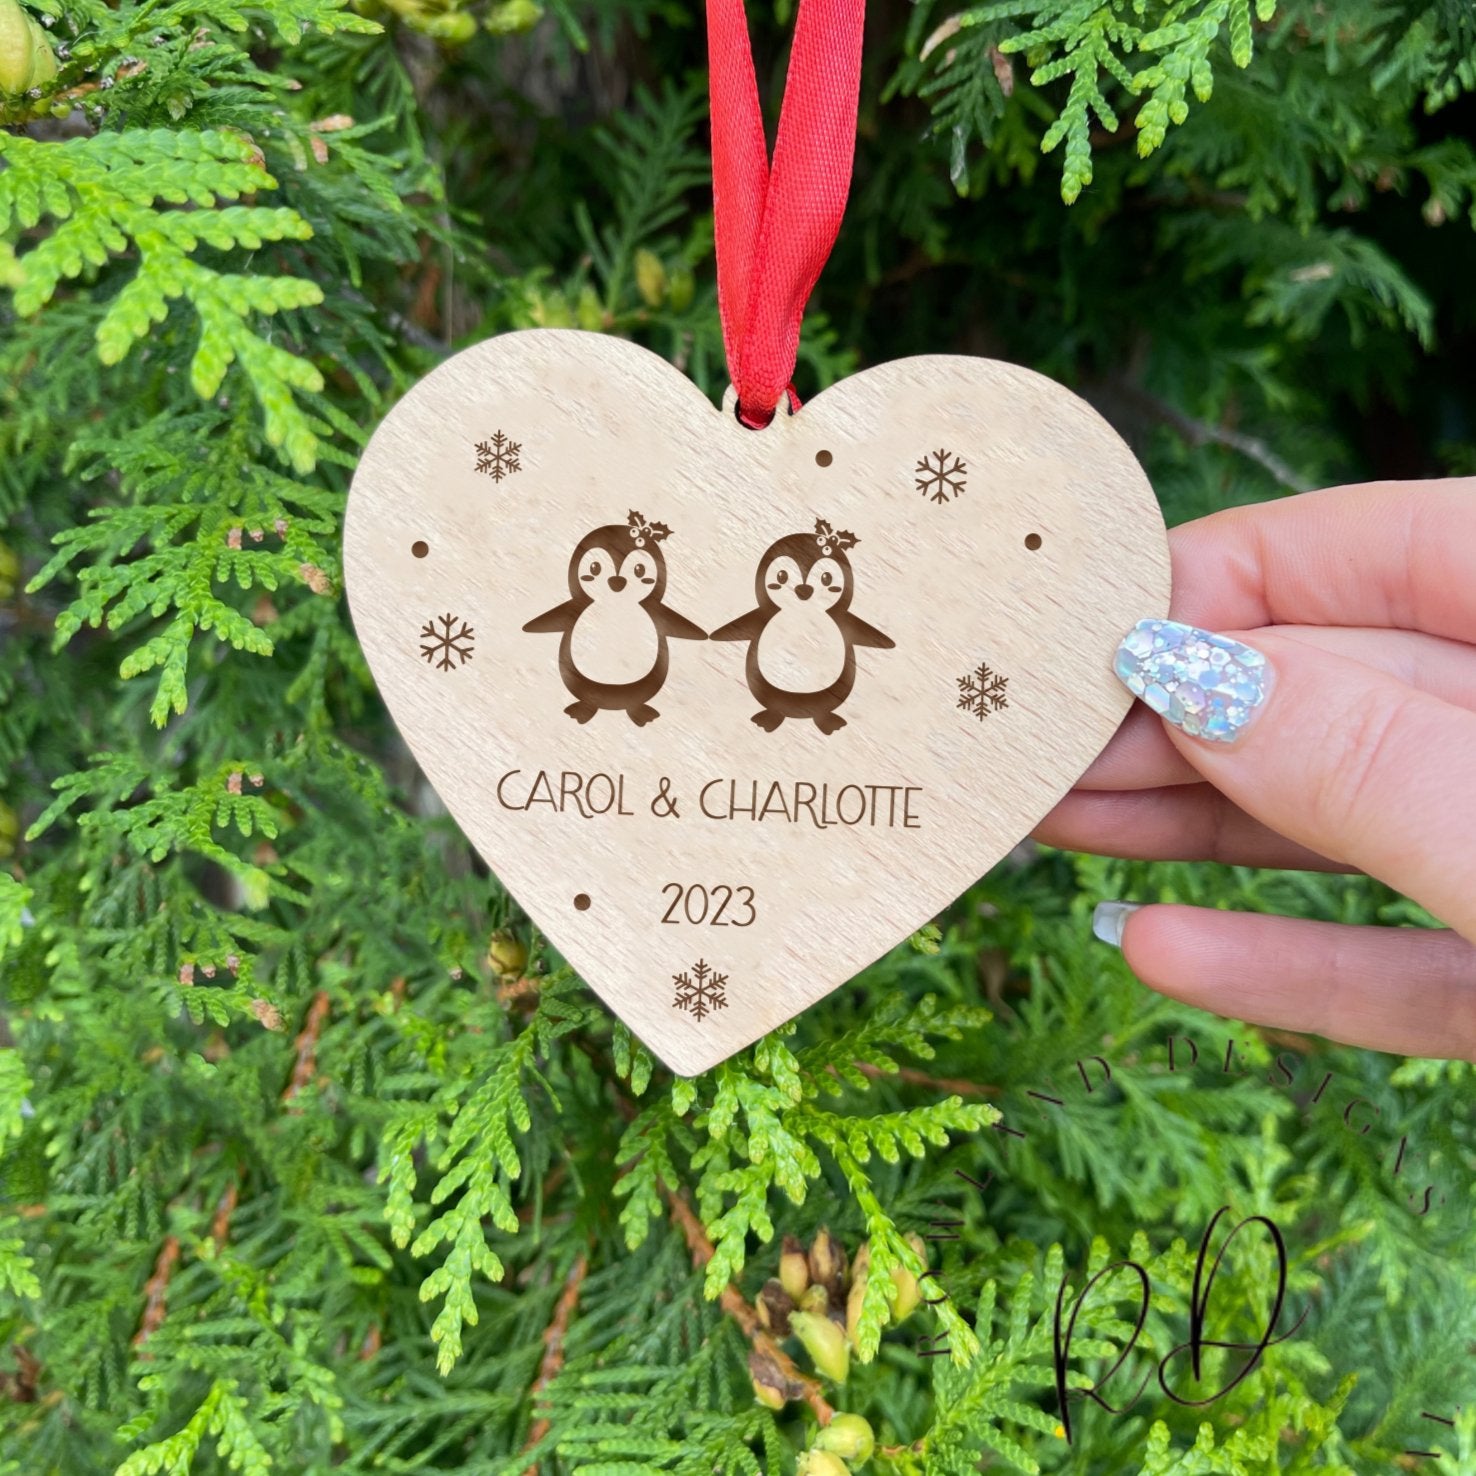 Custom Wooden Heart-Shaped Christmas Bauble with Interlocking Penguins, Snowflakes, Personalized Engravings, and Red Ribbon. Perfect Holiday Decor and Gift for Couples. 🎄🎅